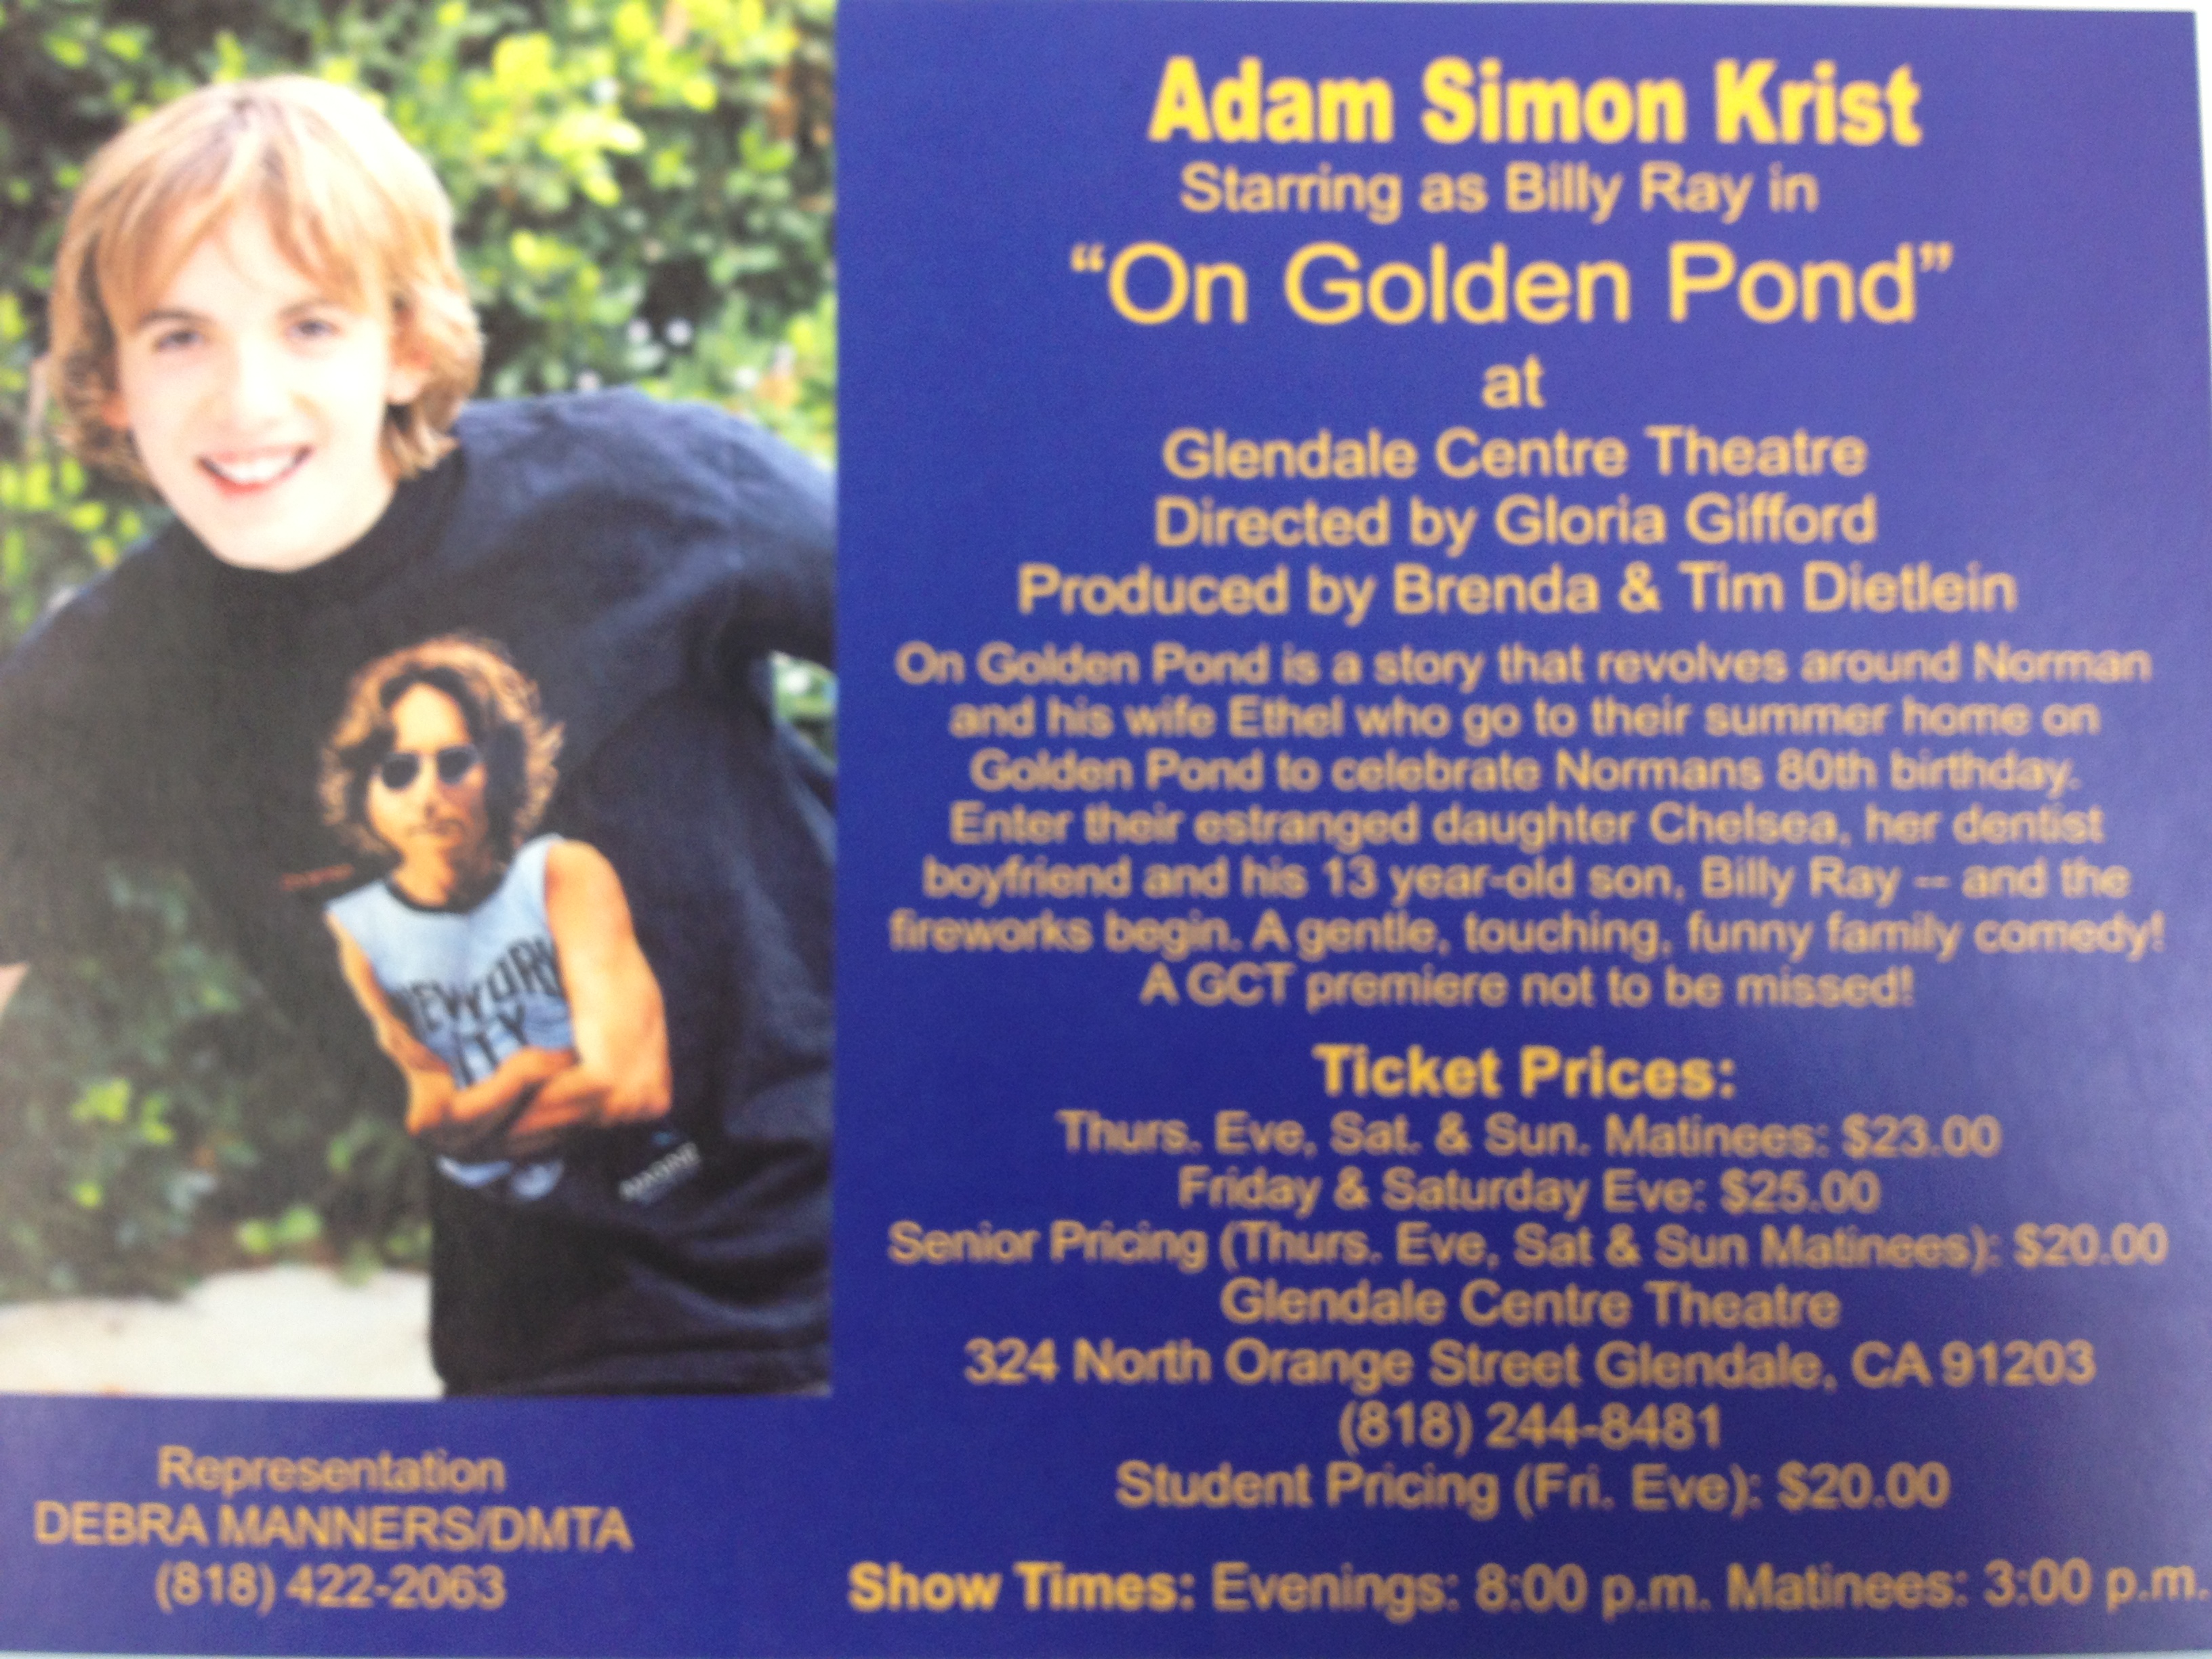 On Golden Pond Directed by Gloria Gifford Adam worked Salome Jens and Andrew Prine Adam played Billy